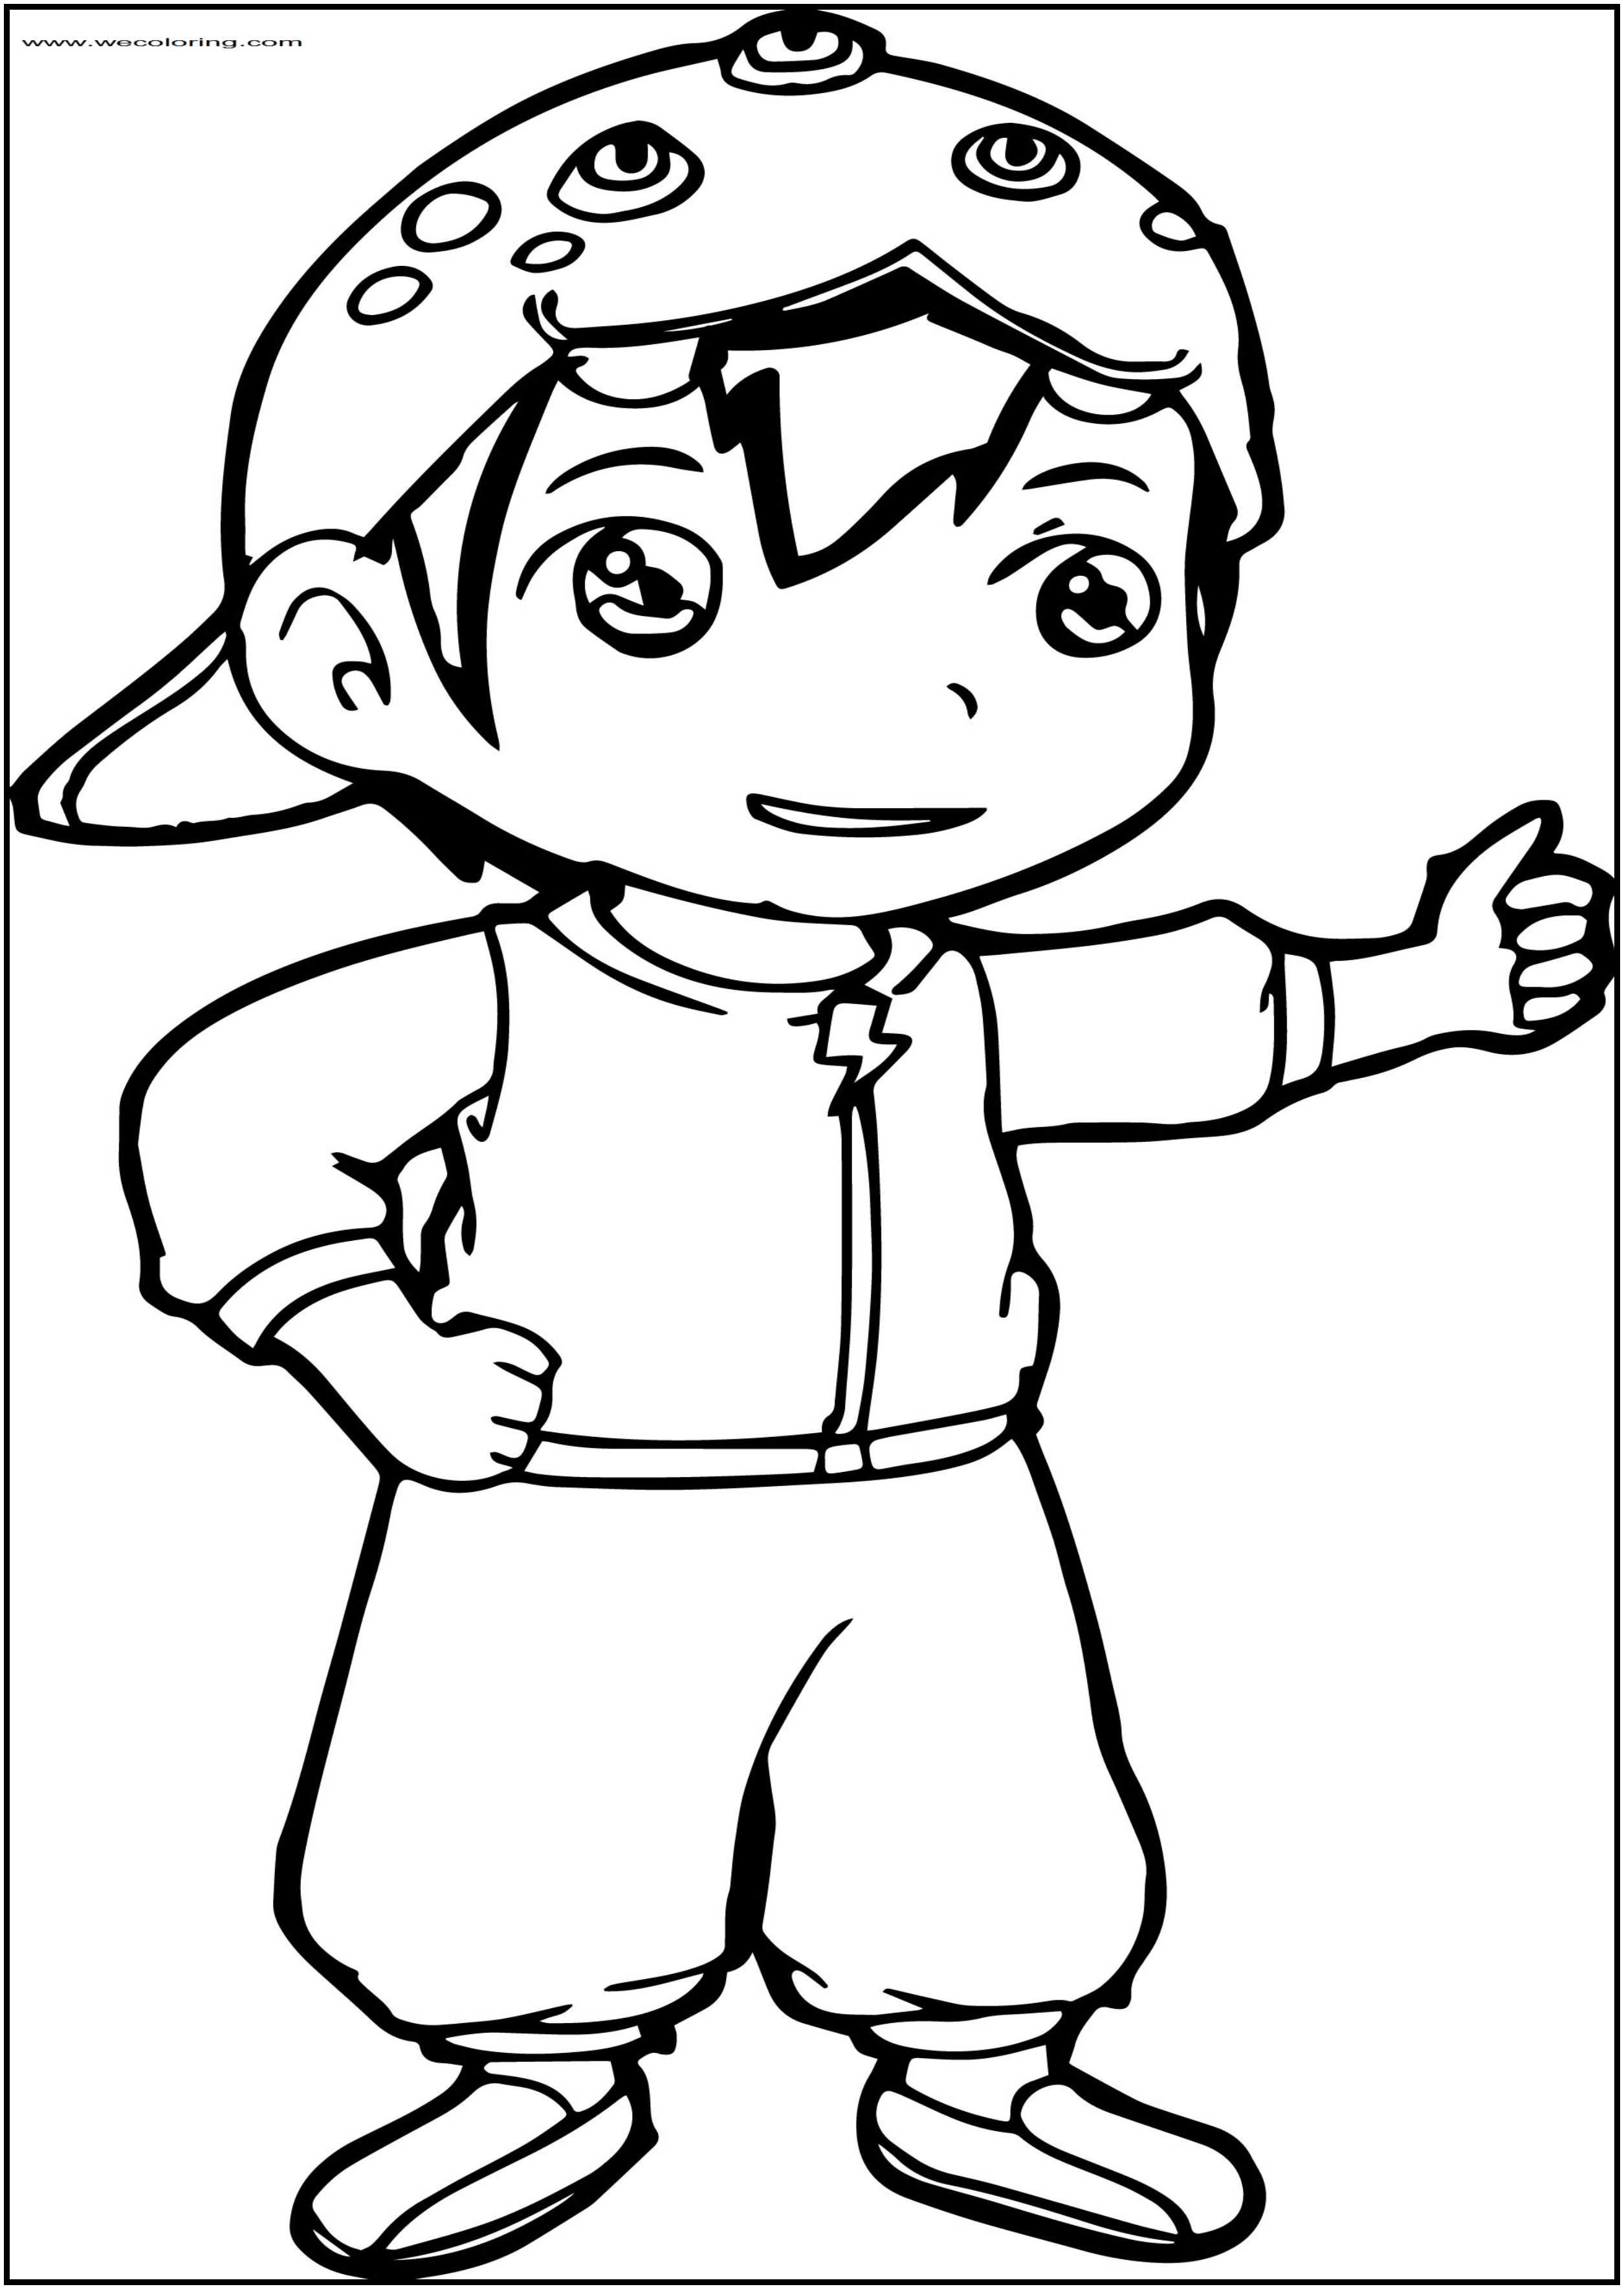 BoBoiBoy Coloring Pages   Coloring Home